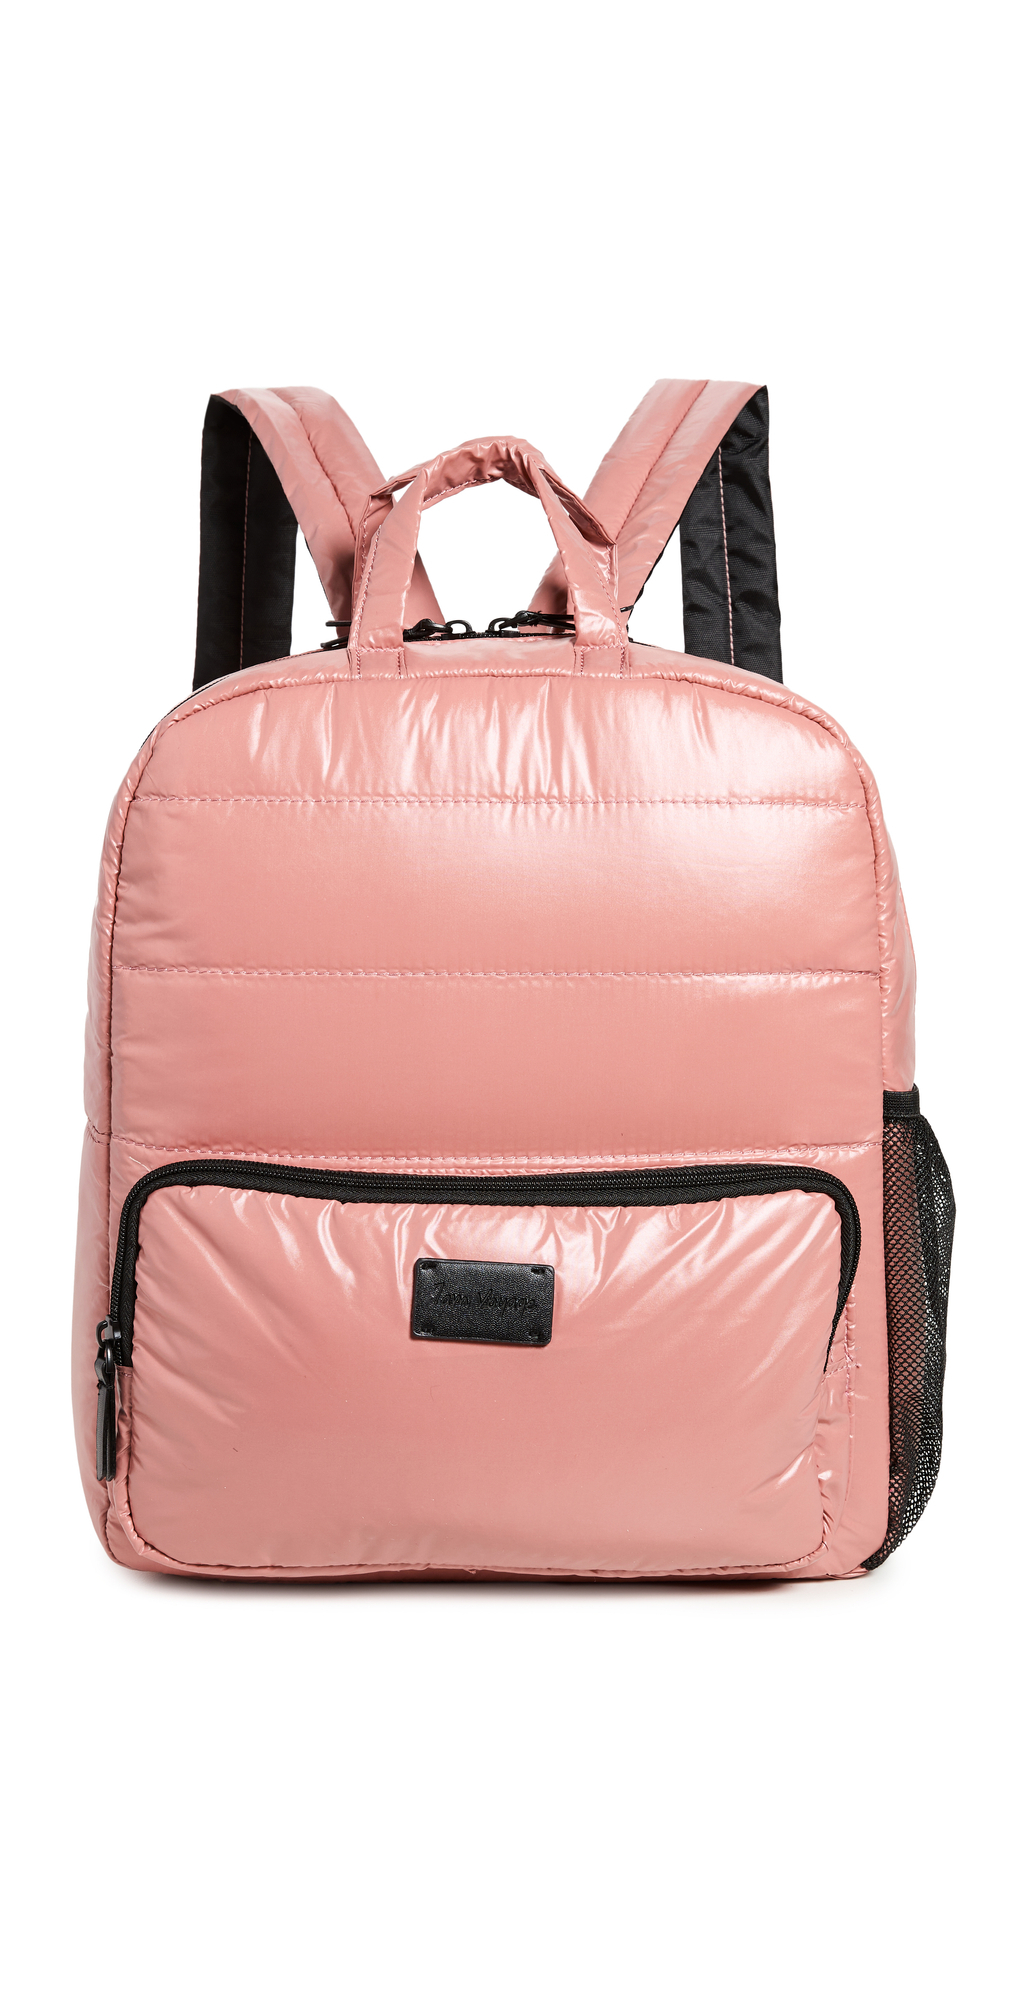 7AM Quilted Midi Diaper Backpack in rose